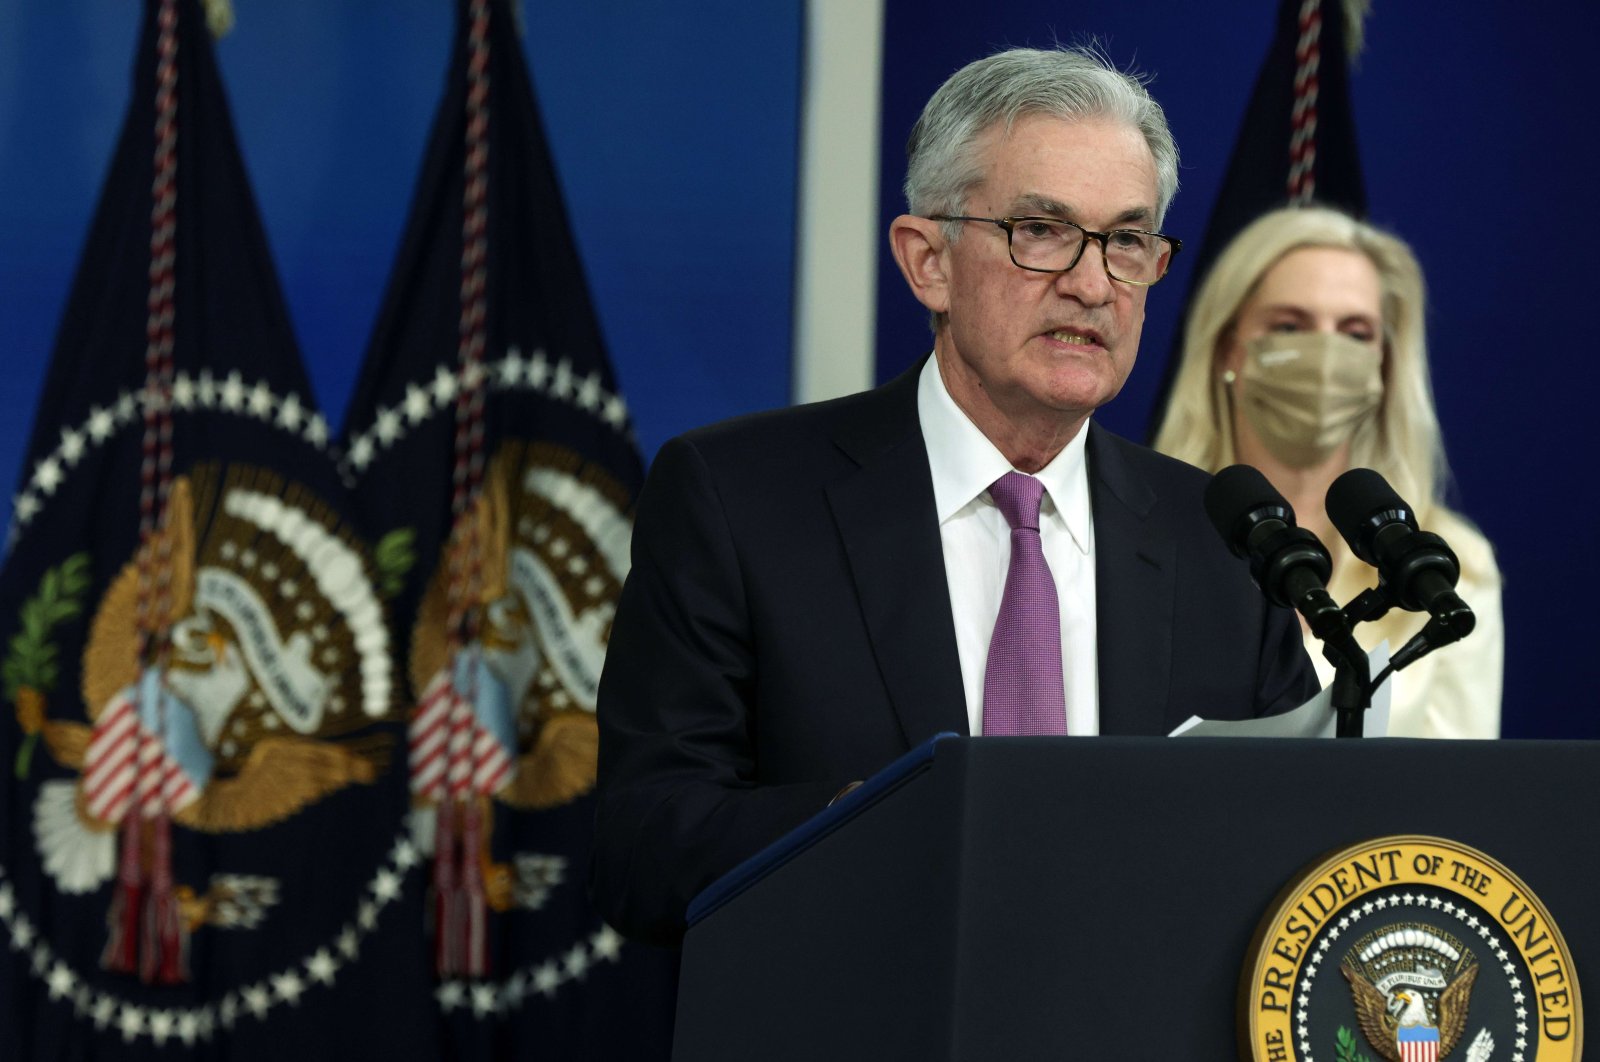 U.S. Federal Reserve (Fed) Chair Jerome Powell (L) speaks as Lael Brainard (R) listens during an announcement at the South Court Auditorium of Eisenhower Executive Office Building, in Washington, D.C., U.S., Nov. 22, 2021. (AFP Photo)